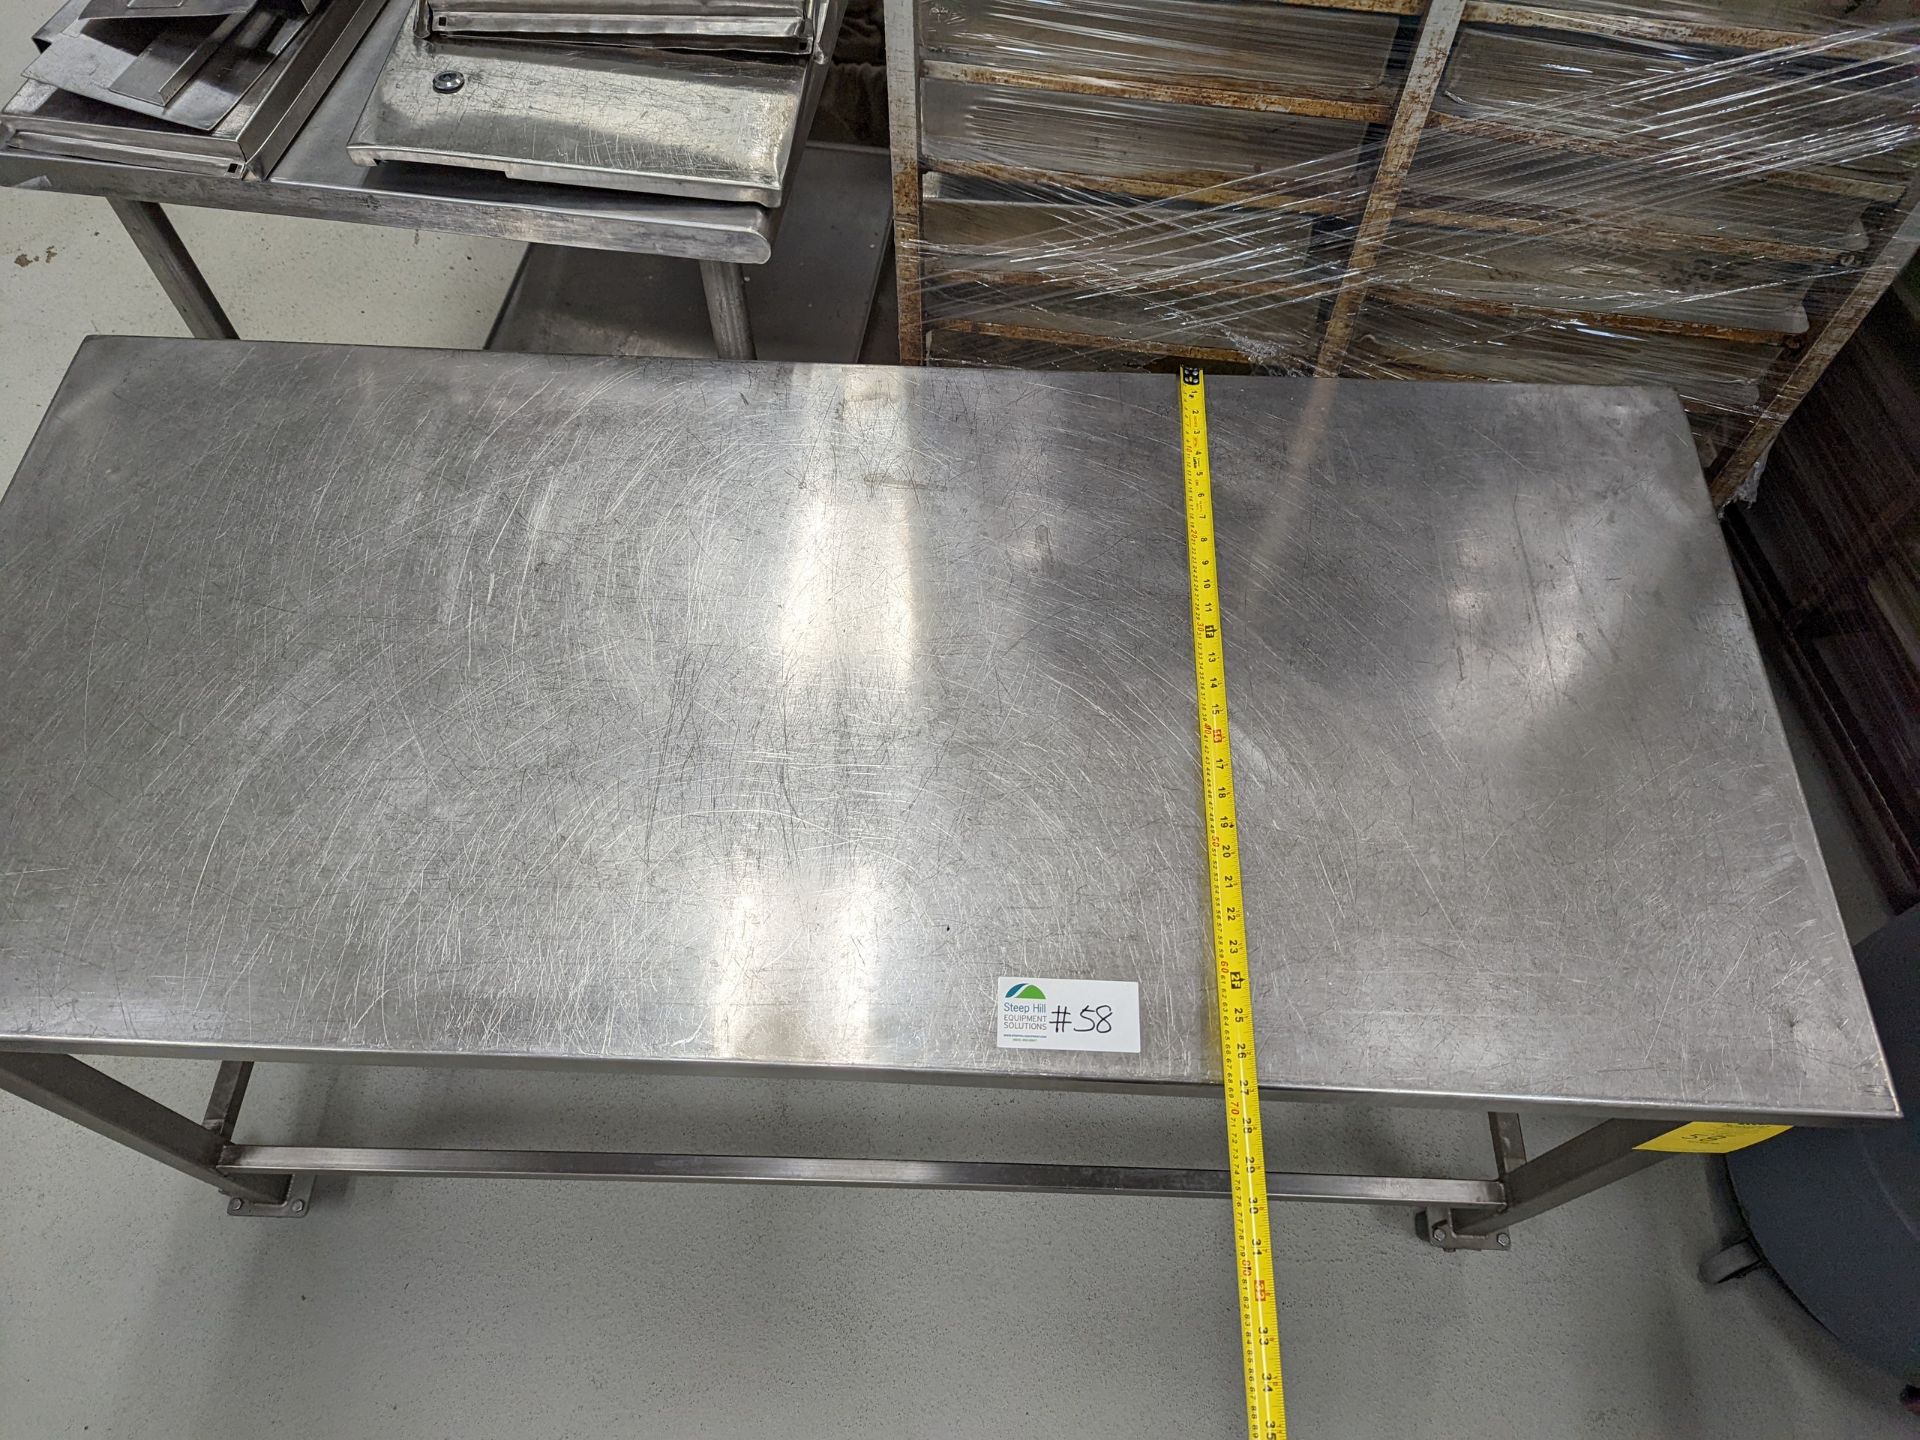 Stainless Table on castor wheels, 60Lx27Wx34H - Image 2 of 4